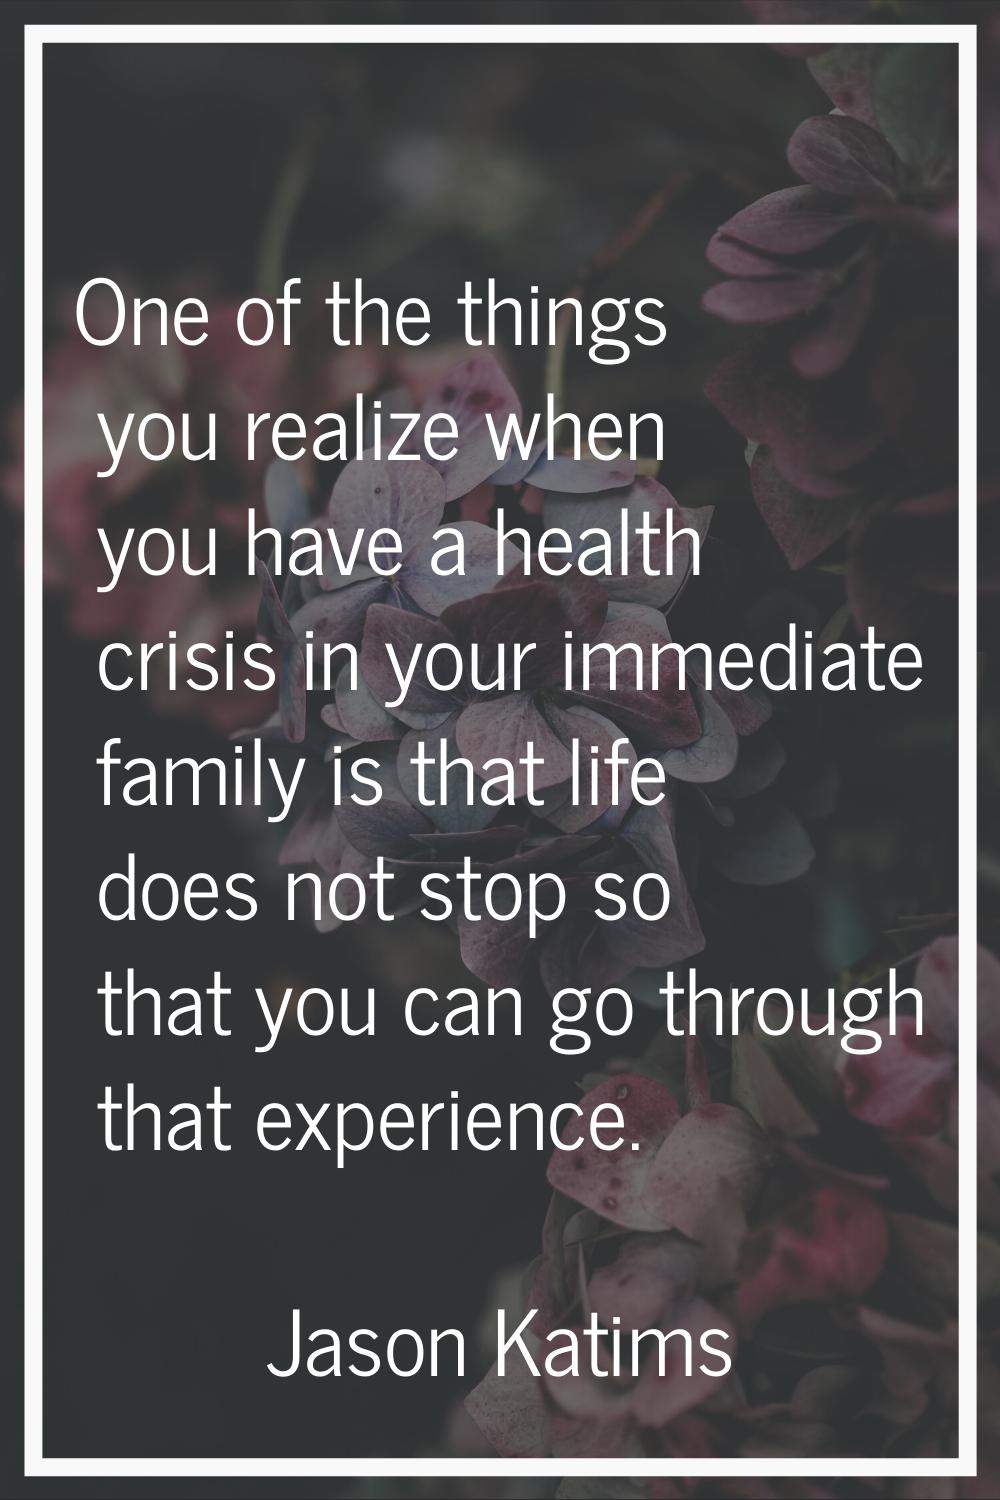 One of the things you realize when you have a health crisis in your immediate family is that life d